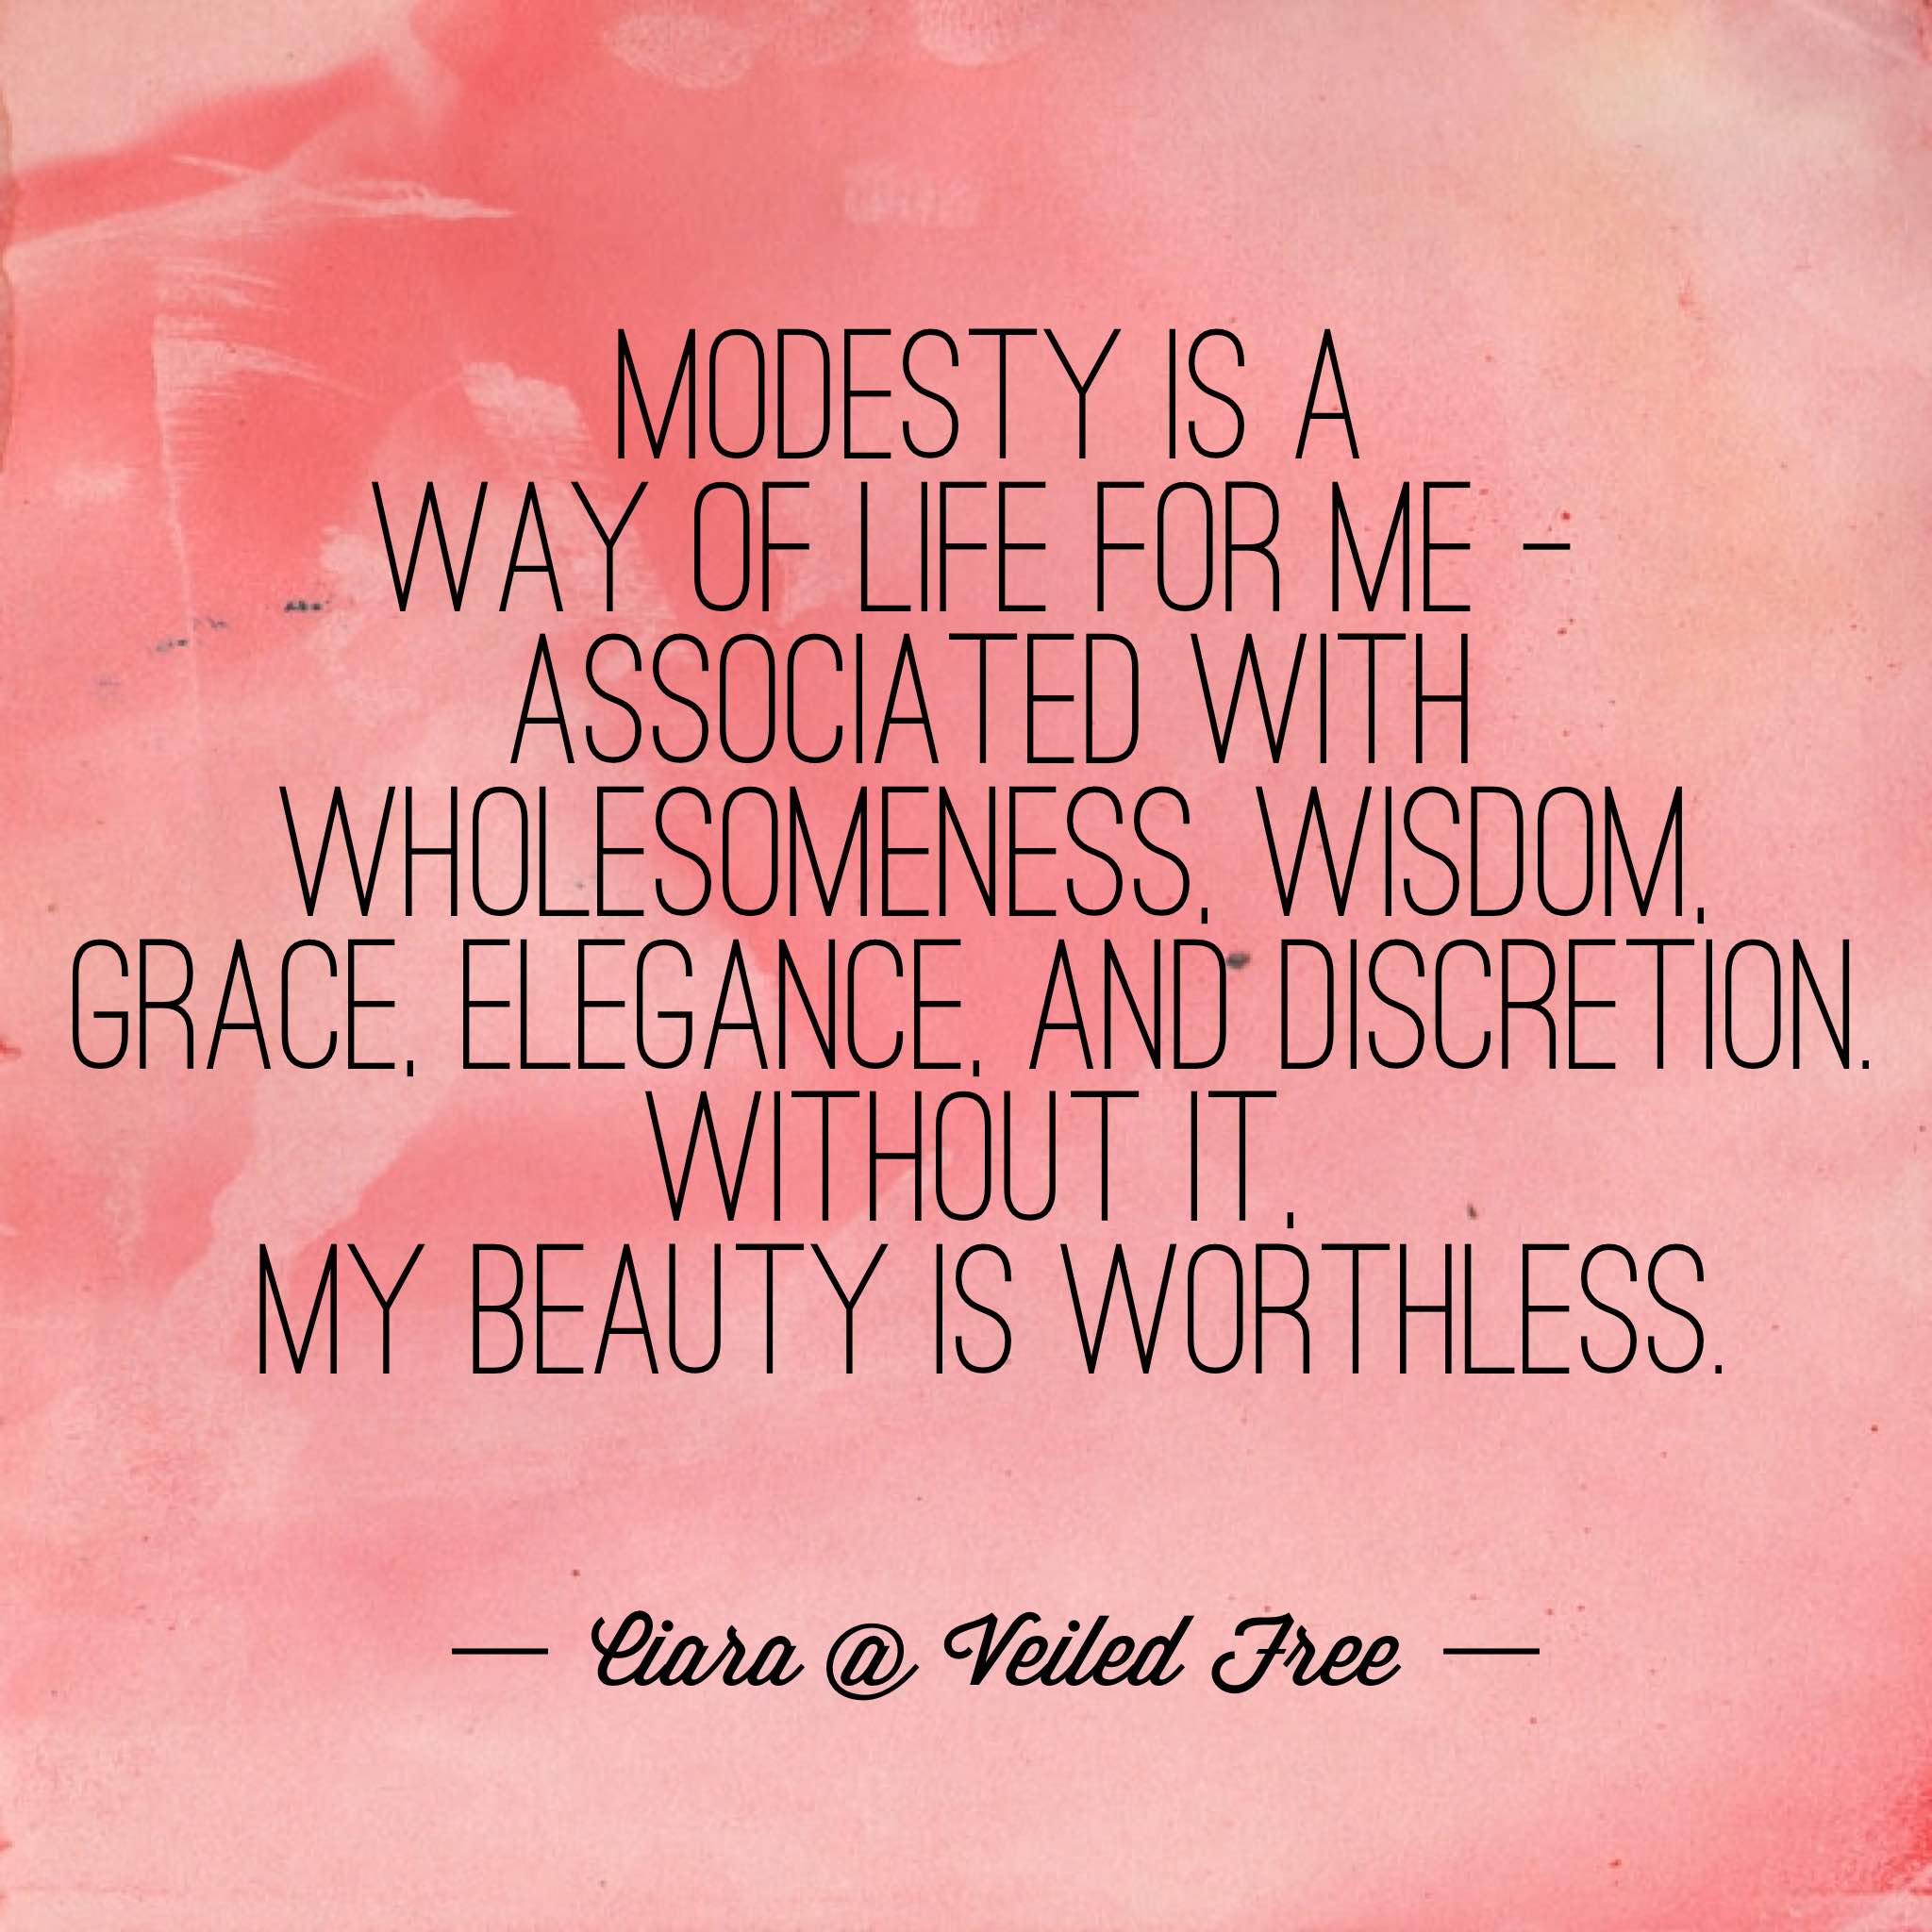 Important thoughts on modesty from Ciara (Veiled Free) - Downtown Demure